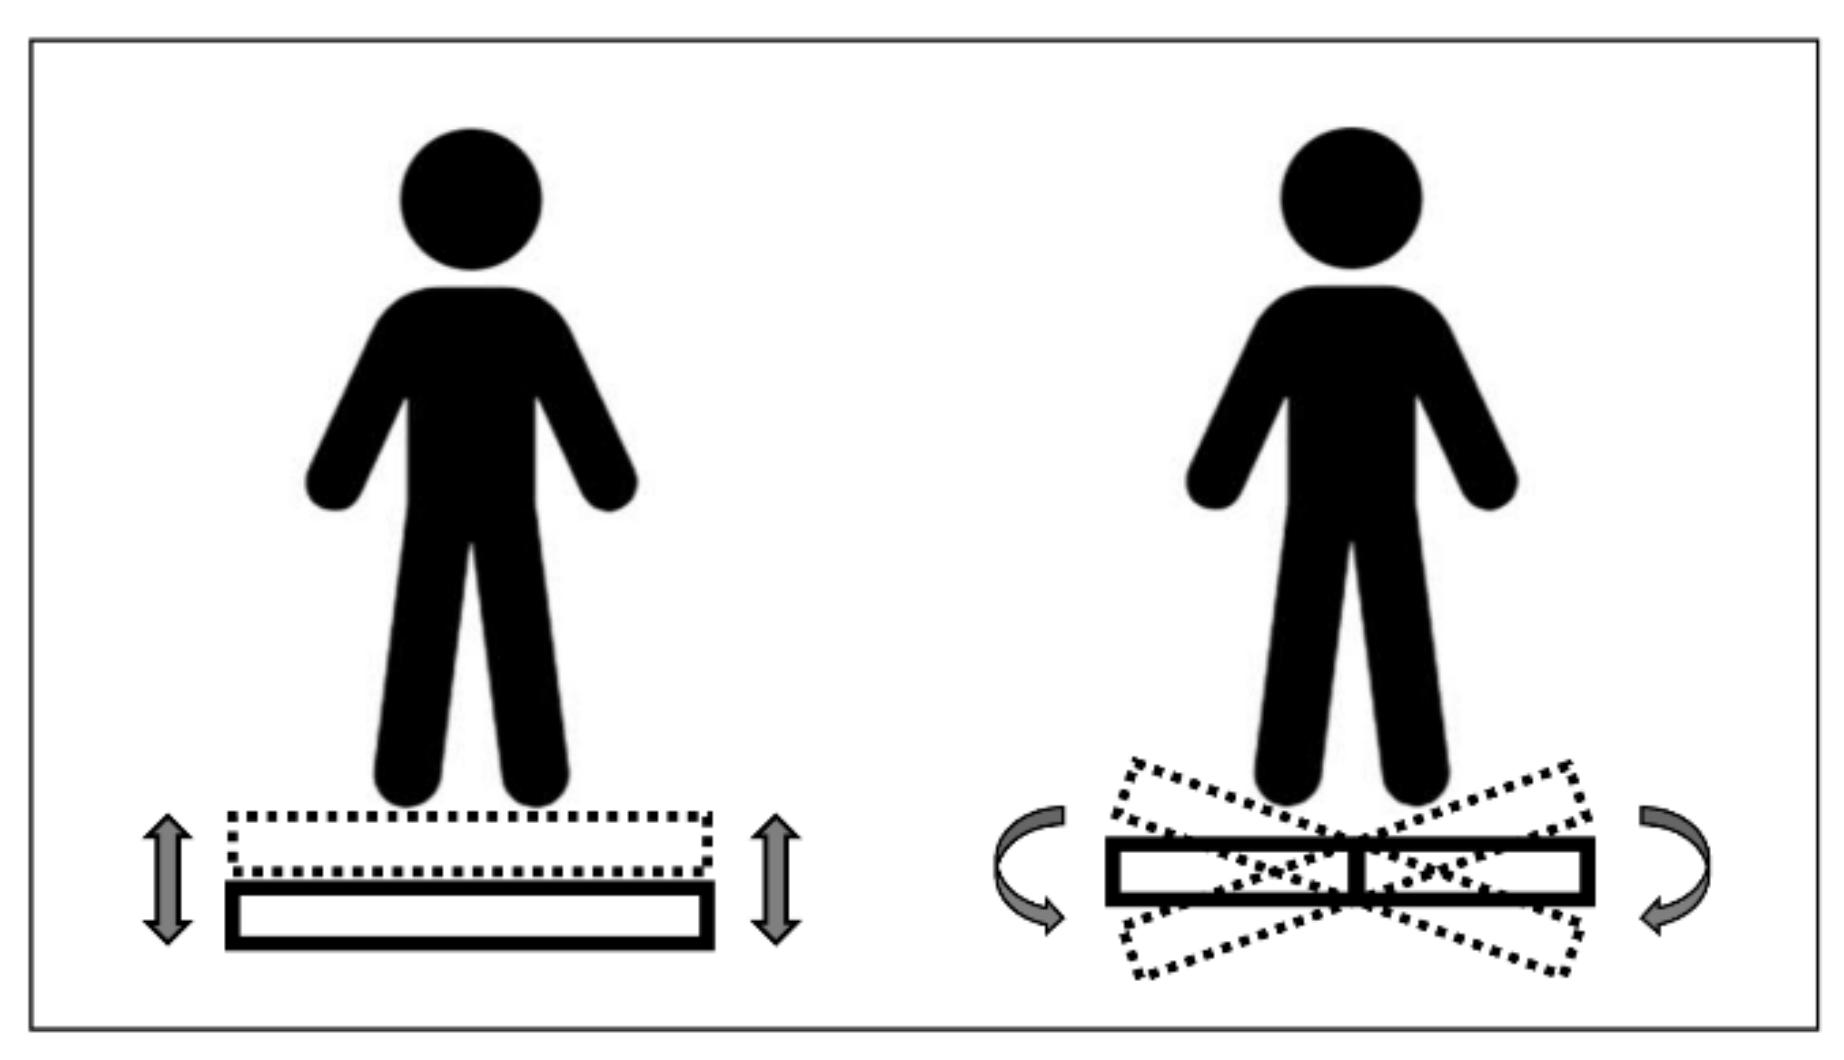 Correct position kept by participant during Whole Body Vibration exposure